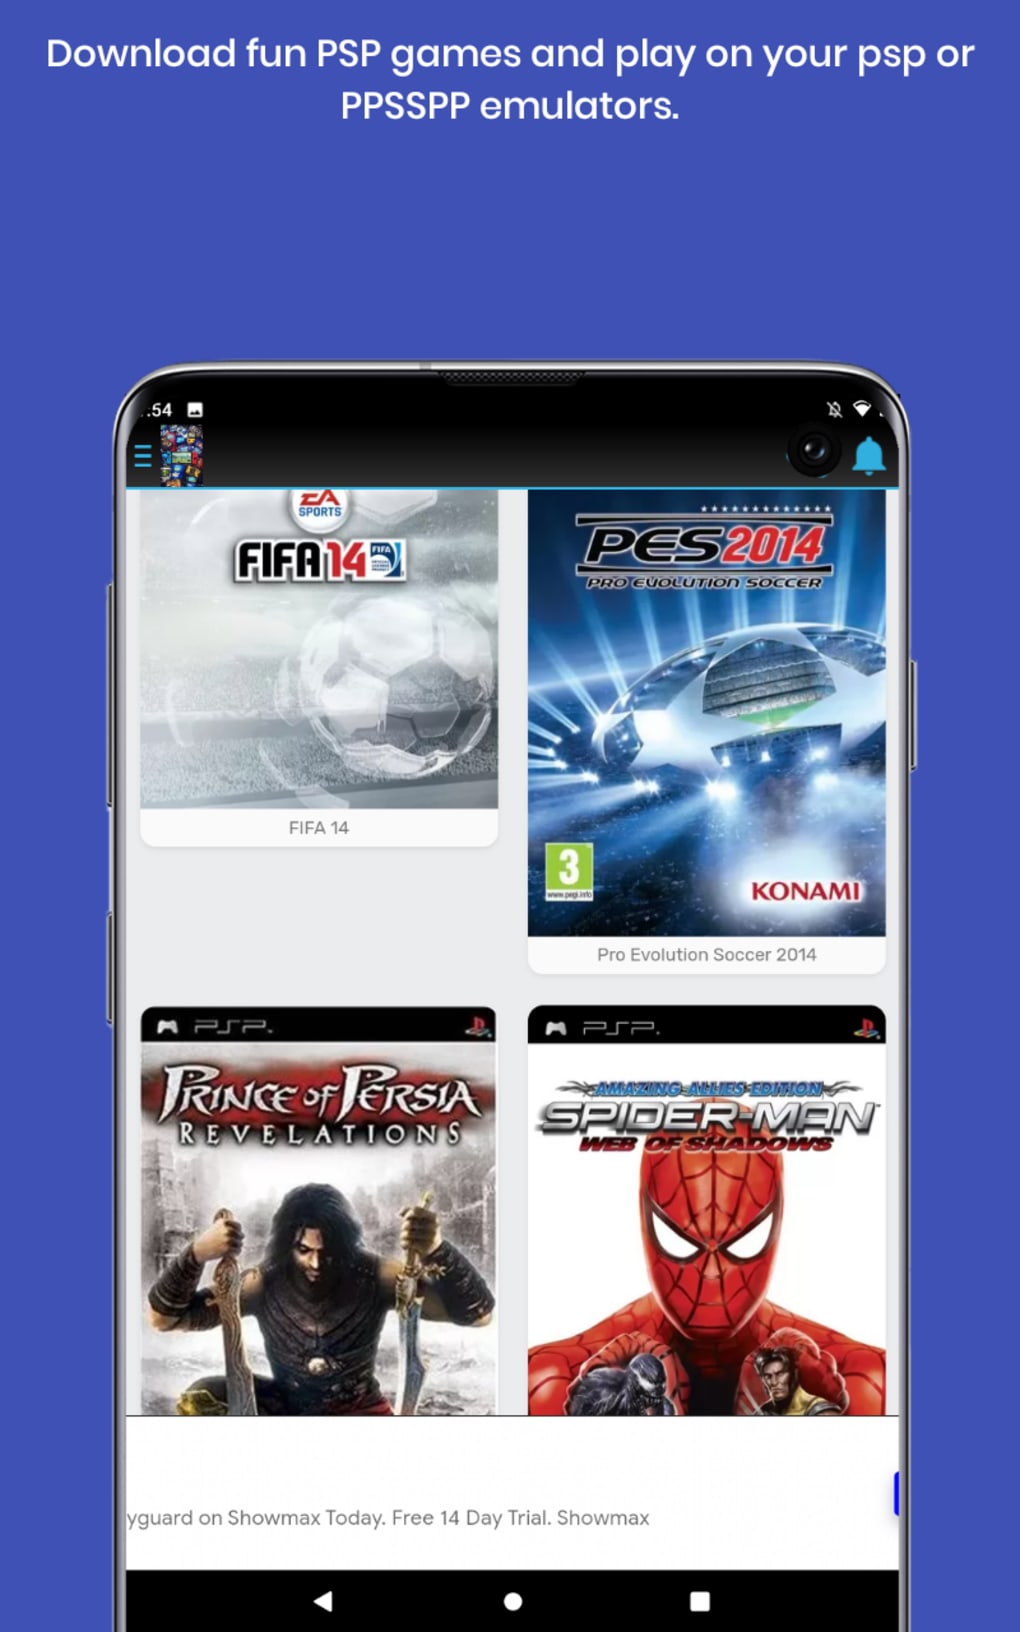 PPSSPP games downloader APK for Android - Download